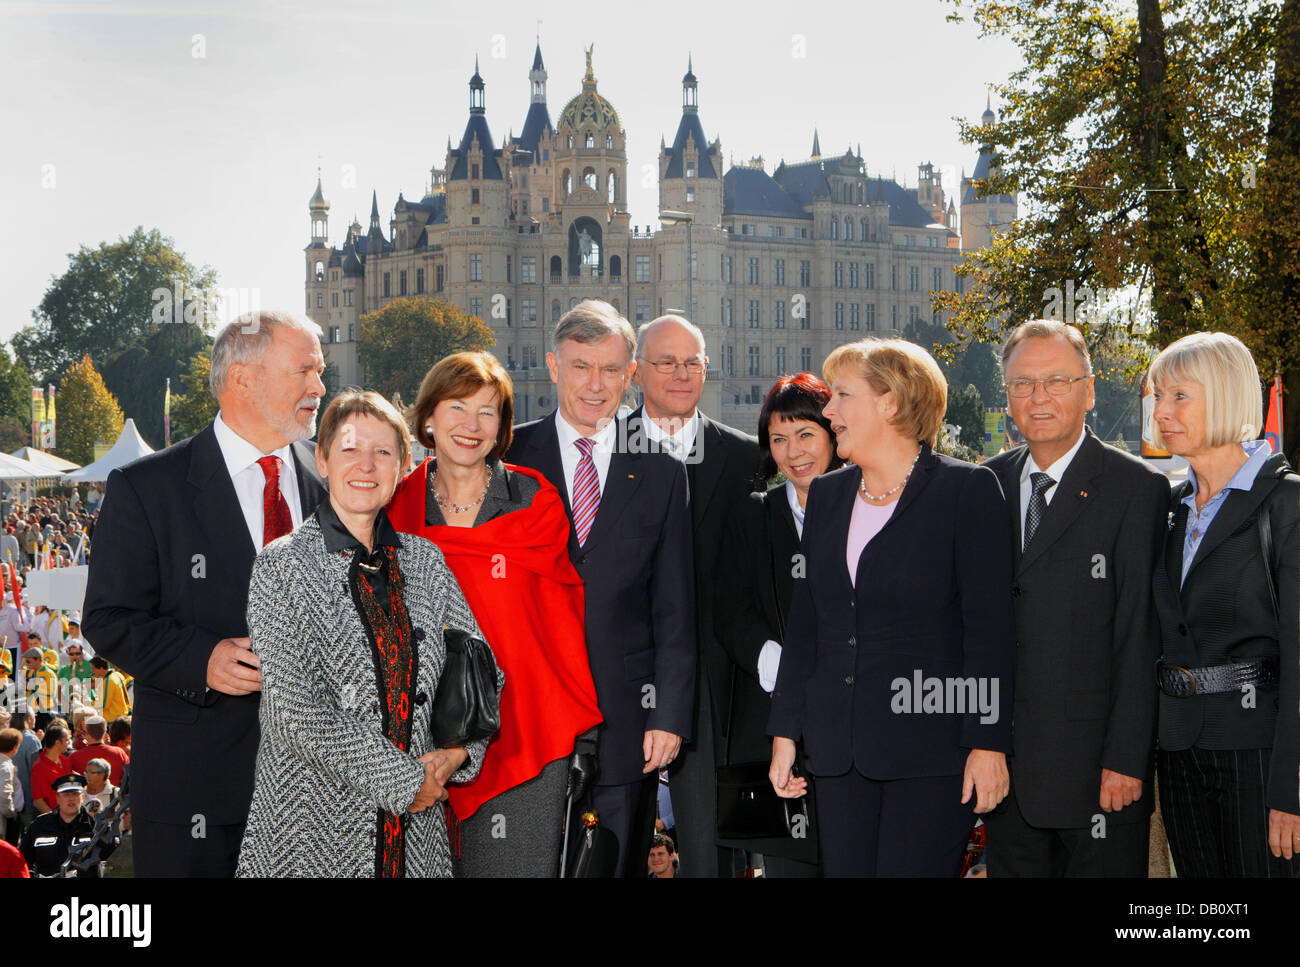 (L-R) The President of the German Bundesrat Harald Ringstorff with his wife Dagmar,the German President Horst Koehler with his wife Eva Luise, the President of the German Bundestag Norbert Lammert with his wife Gertrud, German Chancellor Angela Merkel, the President of the Federal Constitutional Court Hans-Juergen Papier and his wife Marianne pose for a group photo at the Palace in Stock Photo